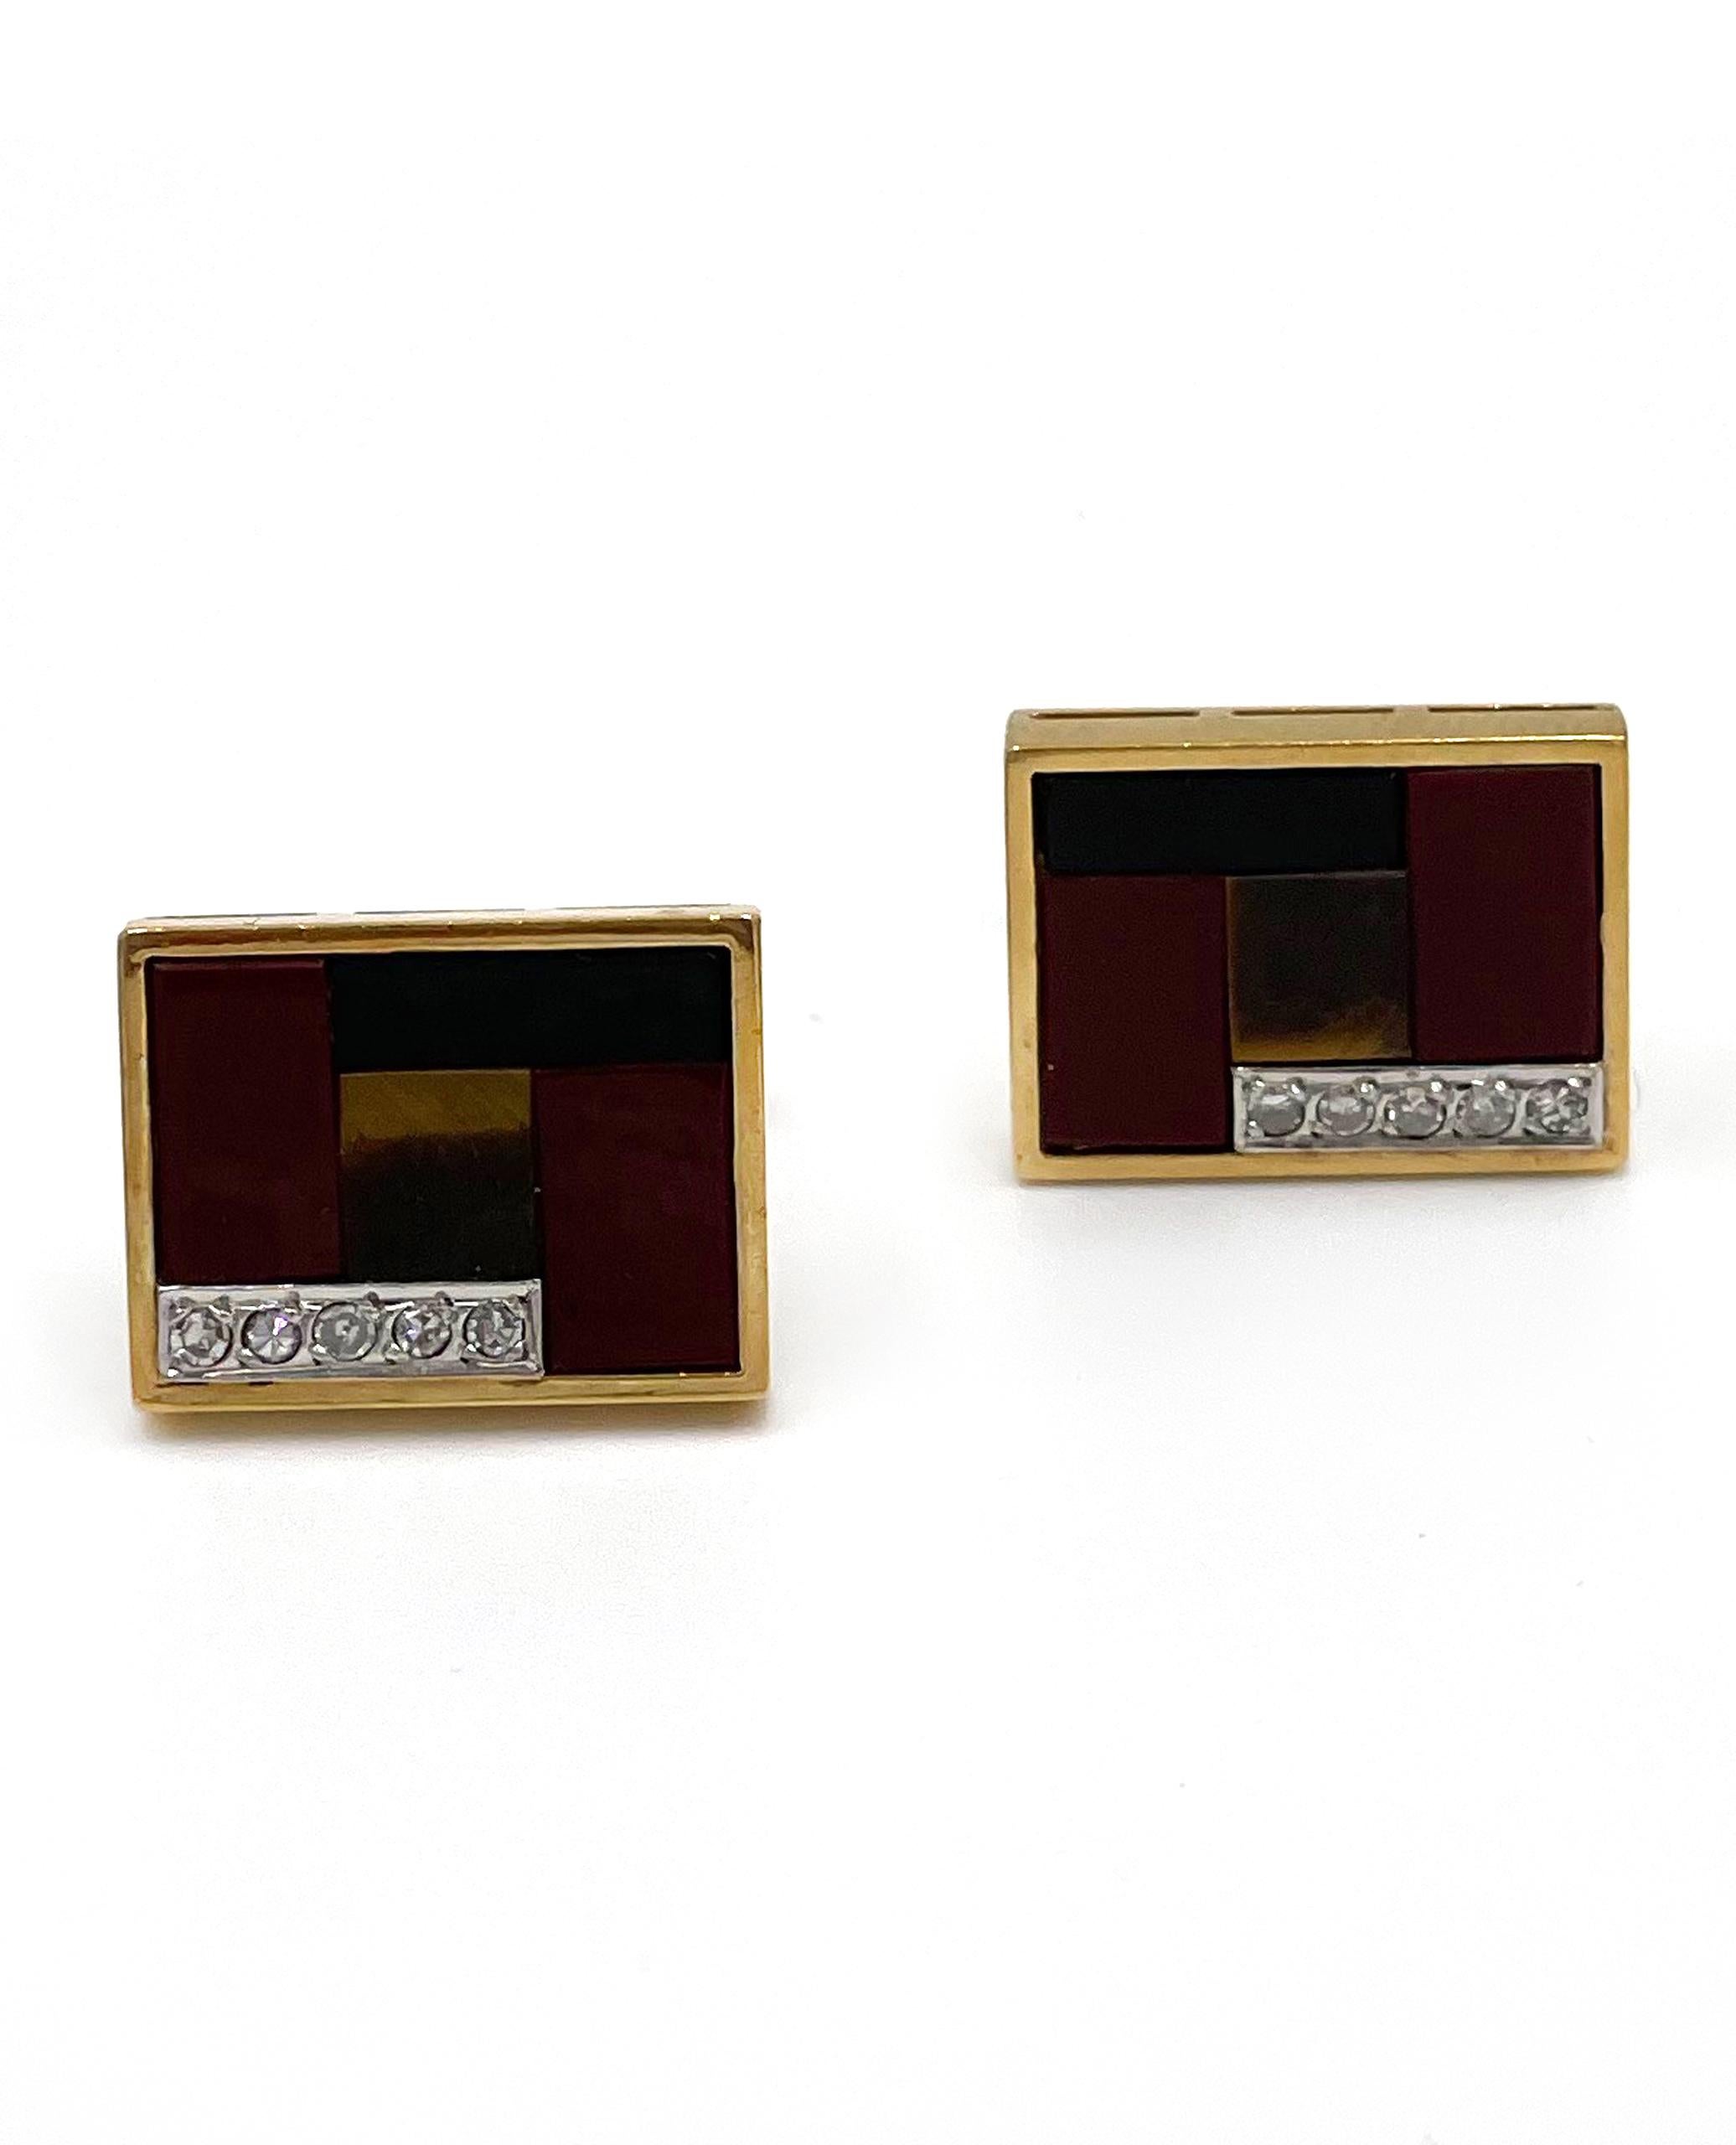 Pre owned vintage estate pair of 18K yellow gold rectangular shape cuff links.  Each cuff link is inlaid with two jasper, one black onyx and one flat tiger eye.  There is a white gold strp at the corner that has five bead set, single cut